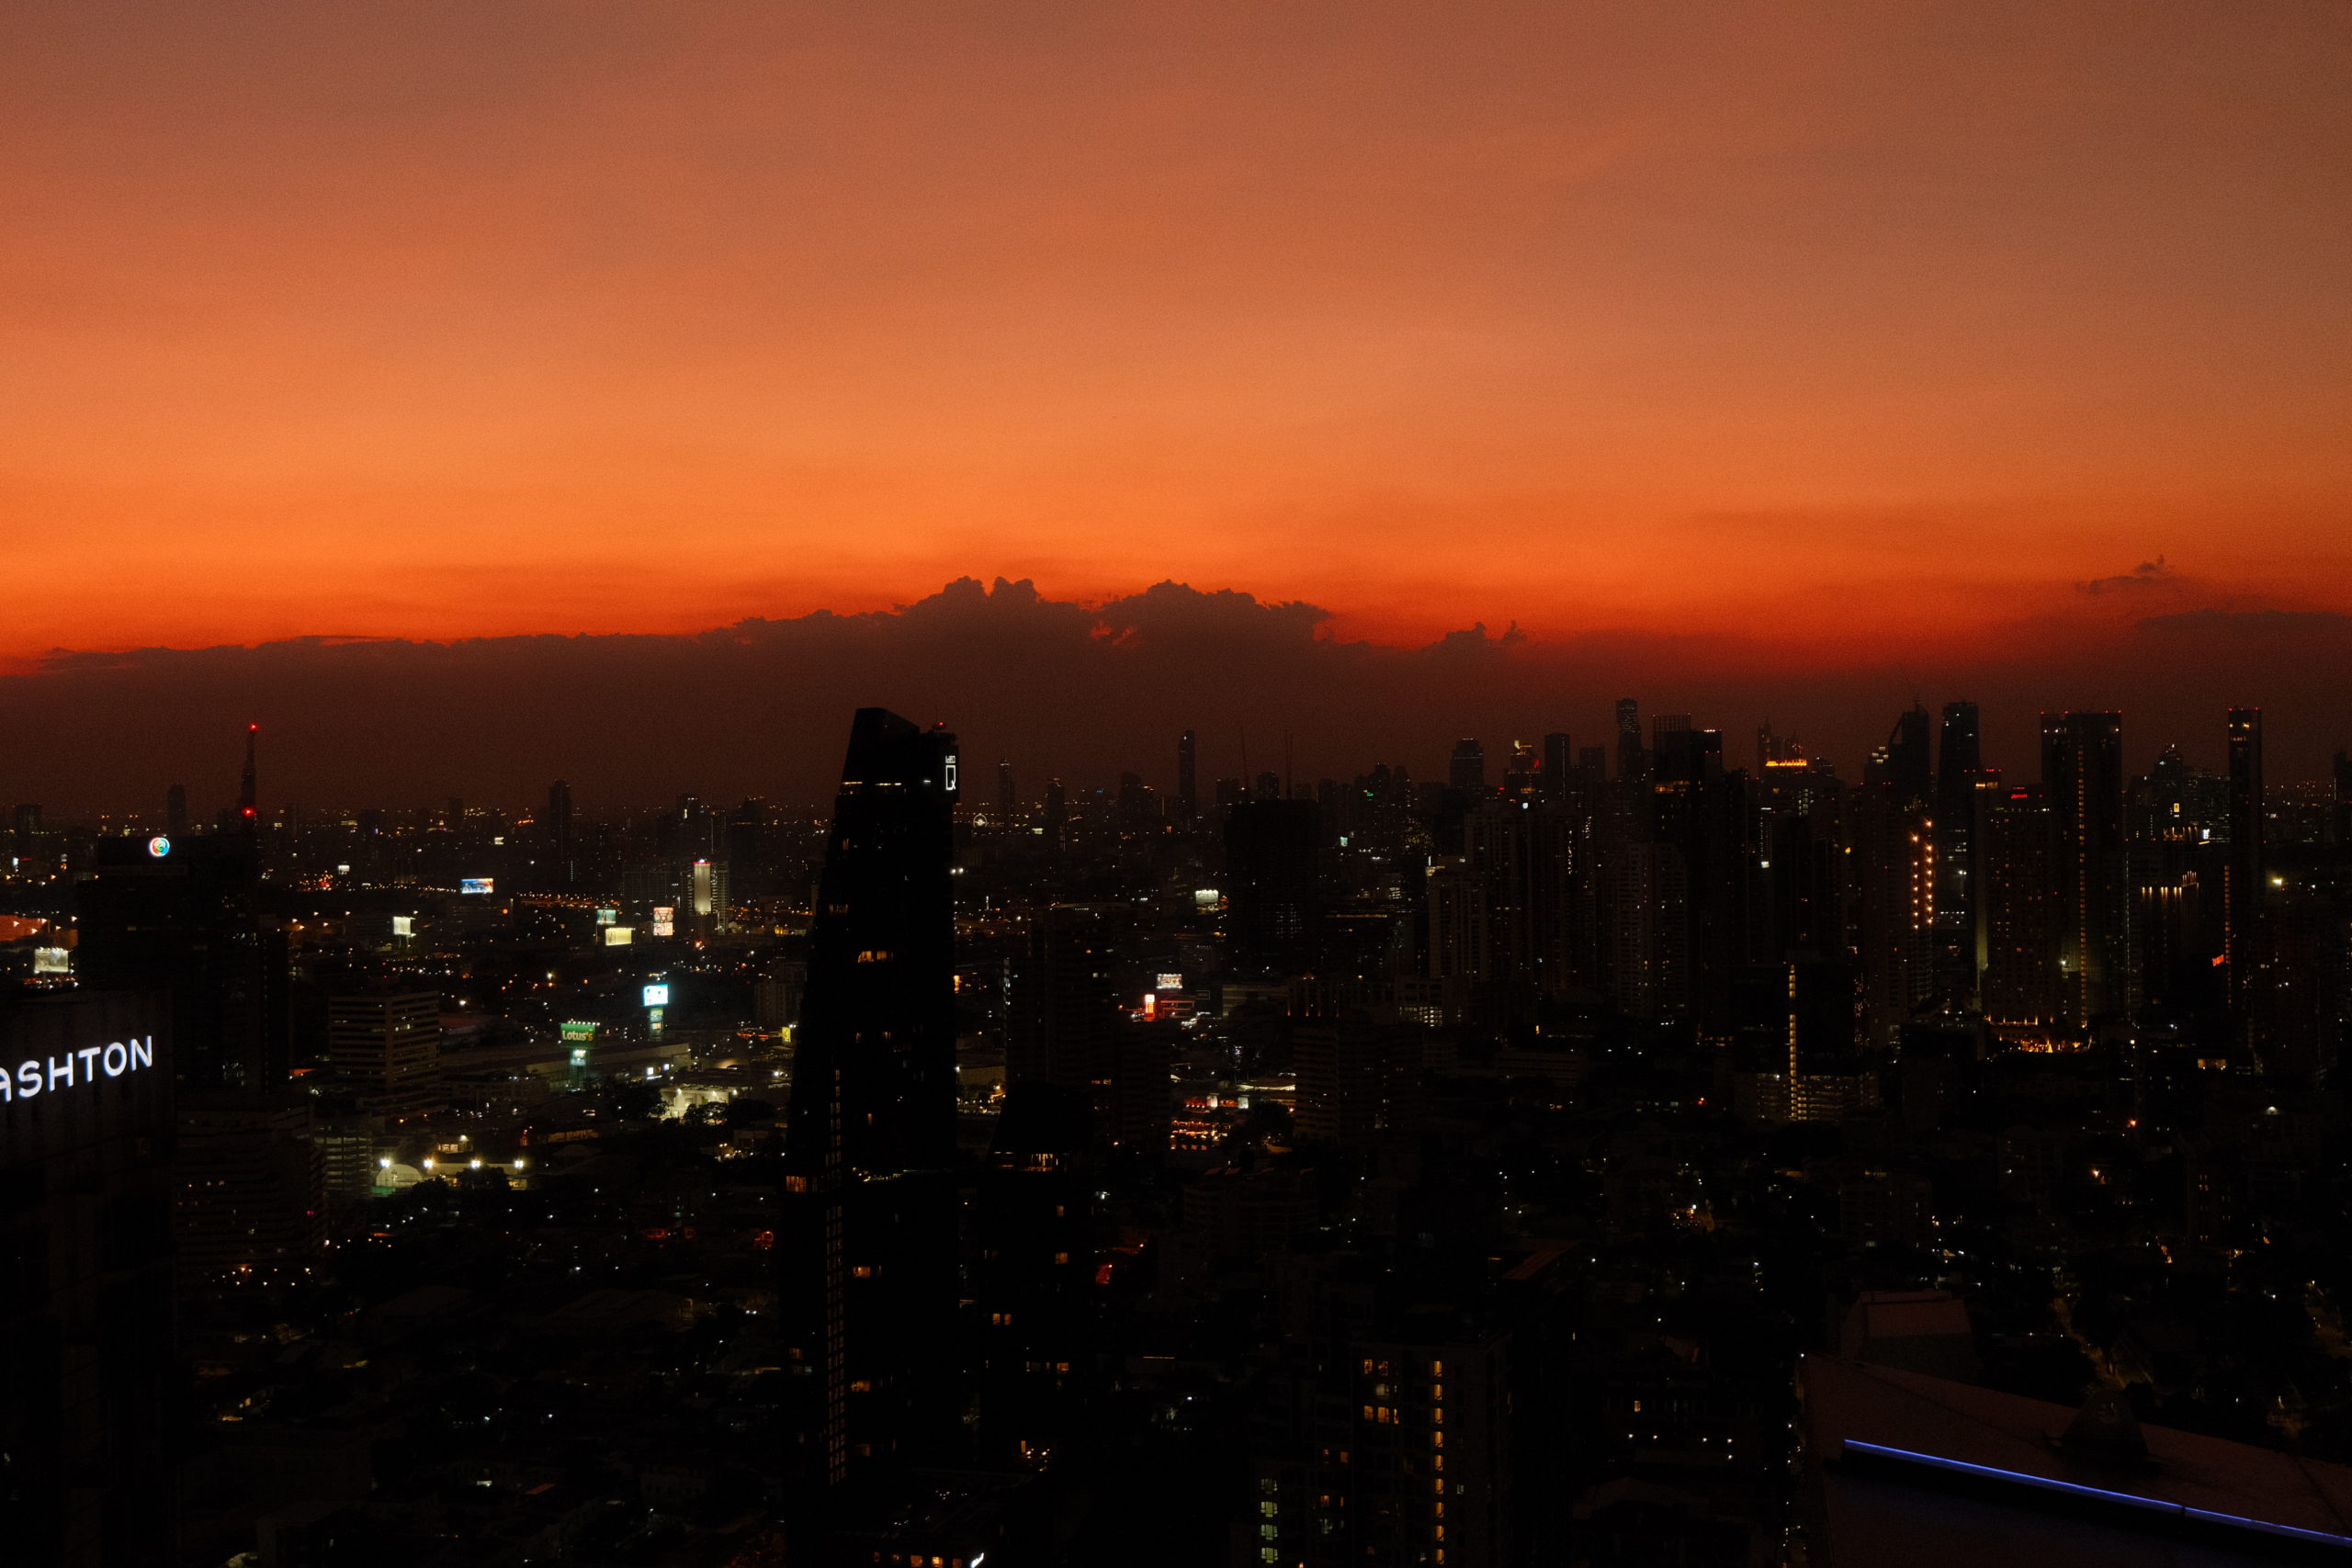 An intense orange and purple sunset over the many skyscrapers of Bangkok.